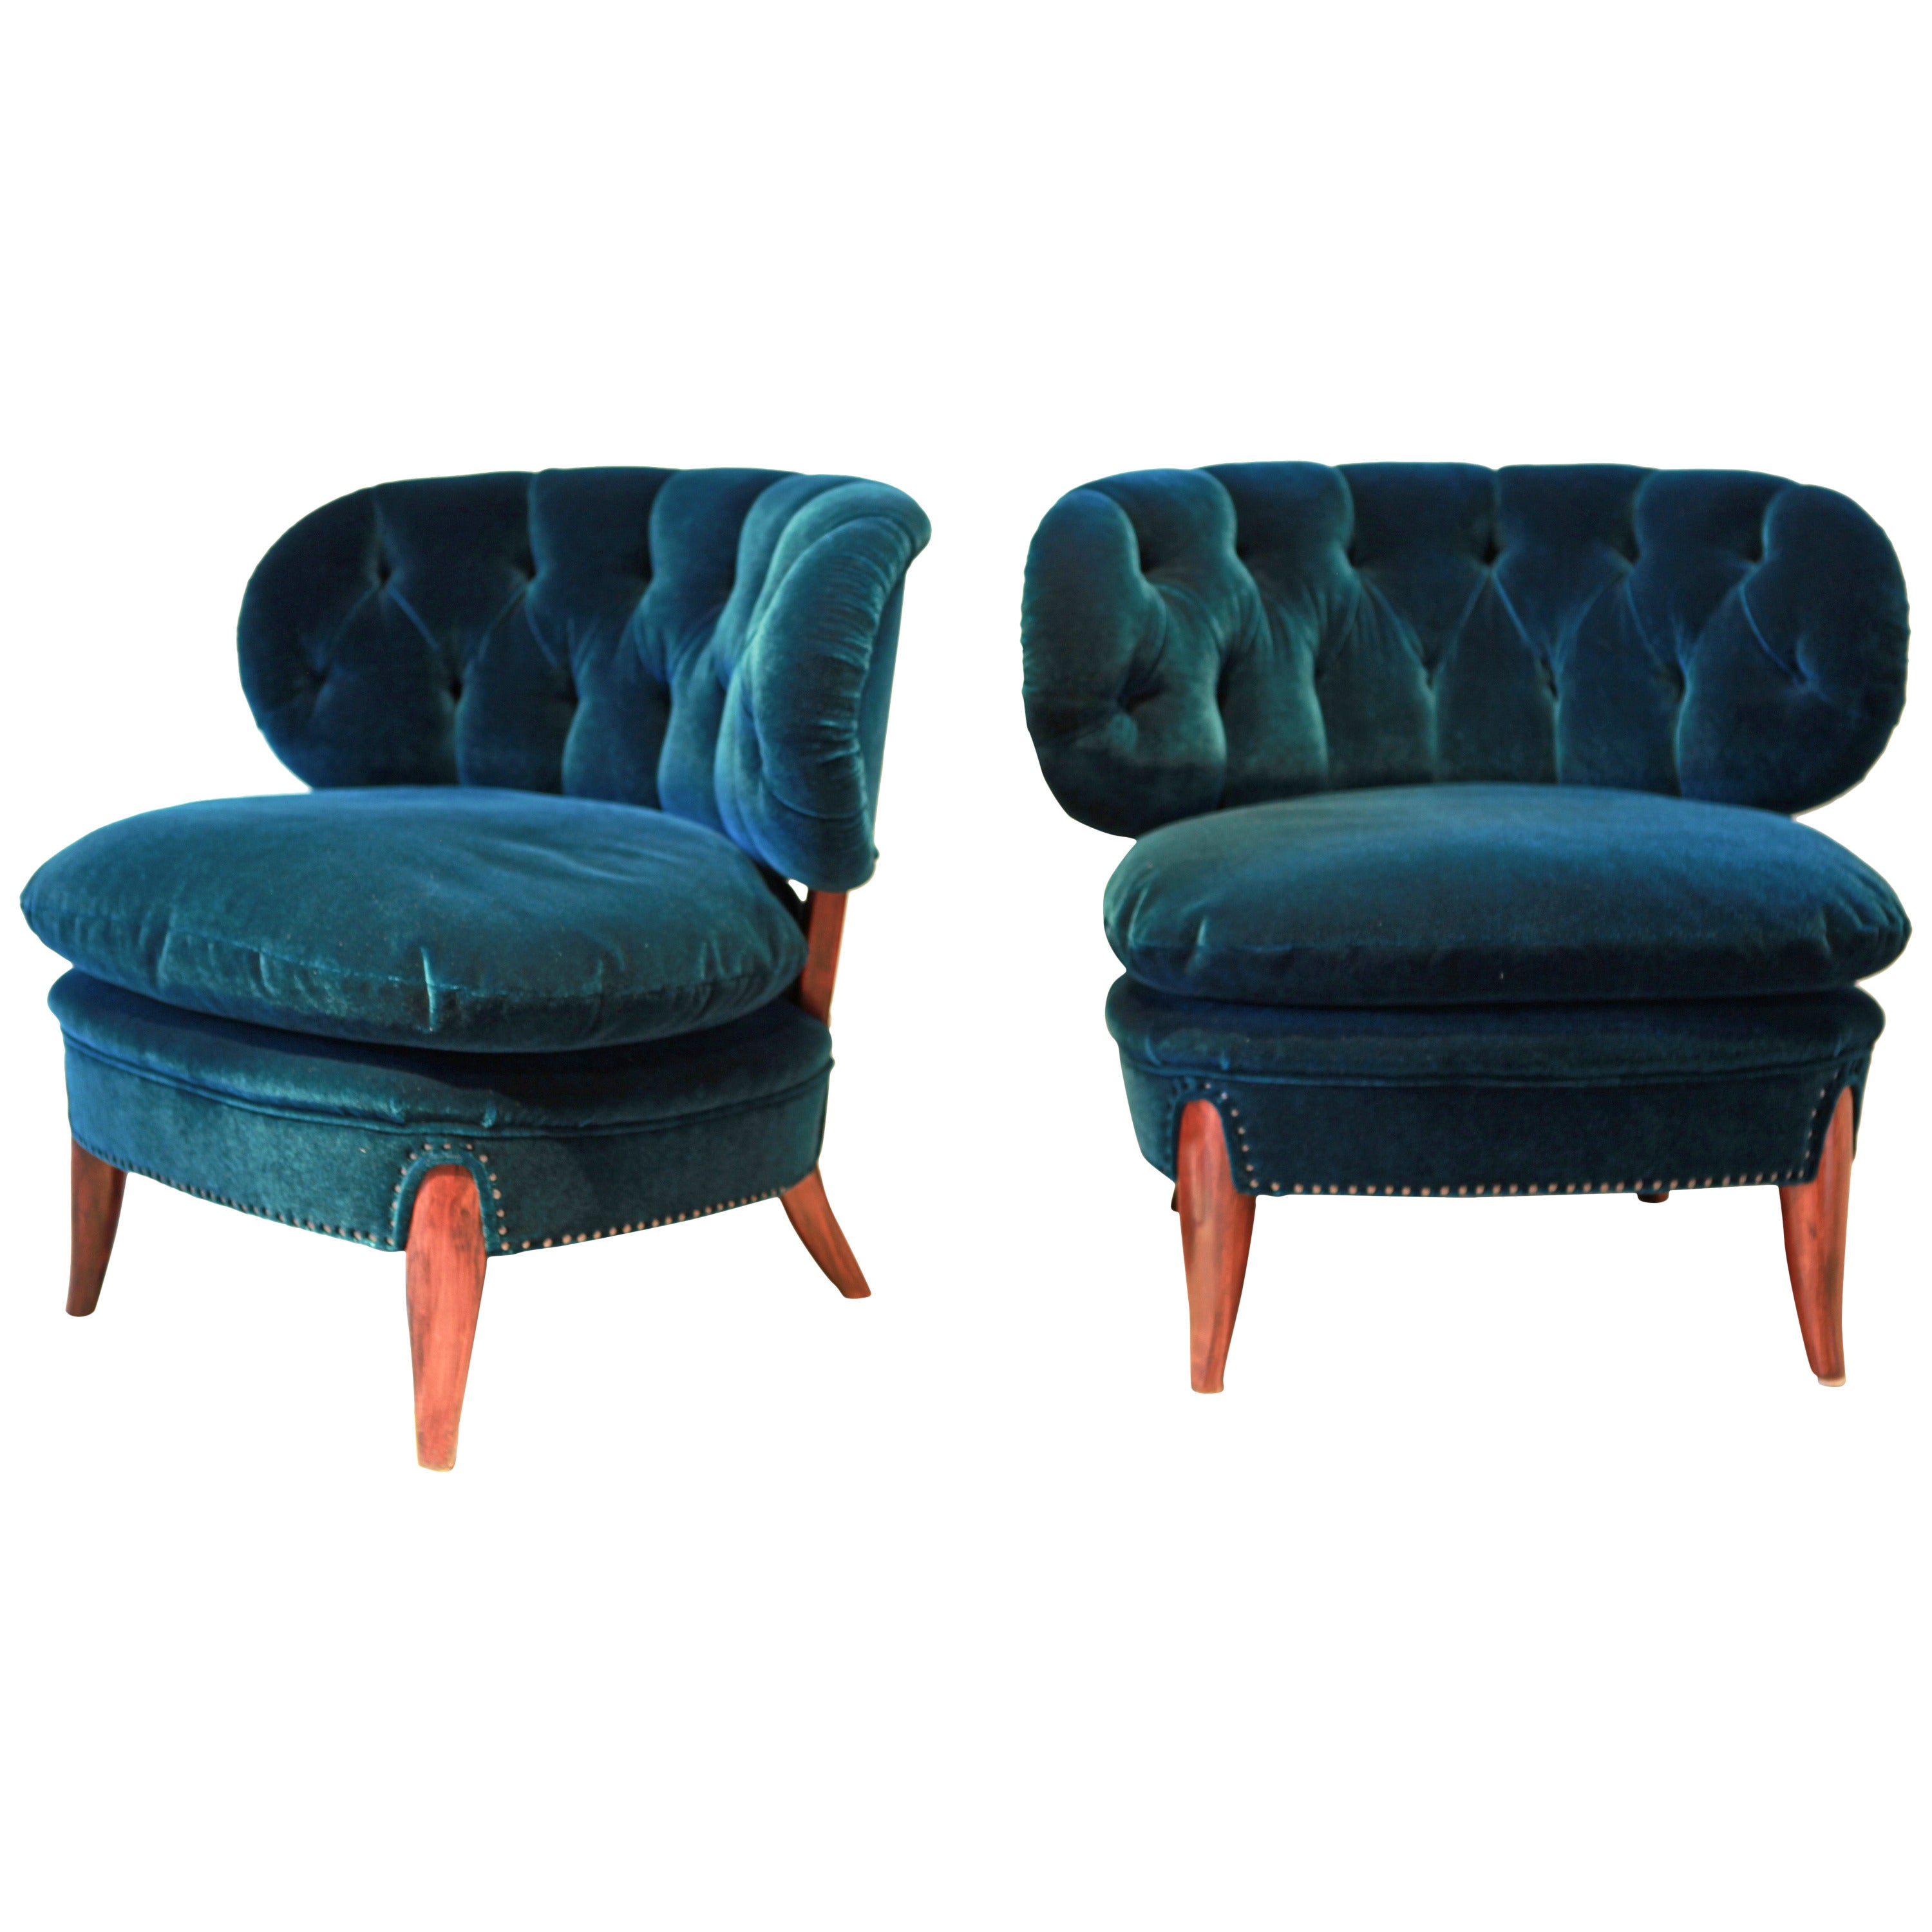 Otto Schulz, Pair of Cocktail Chairs